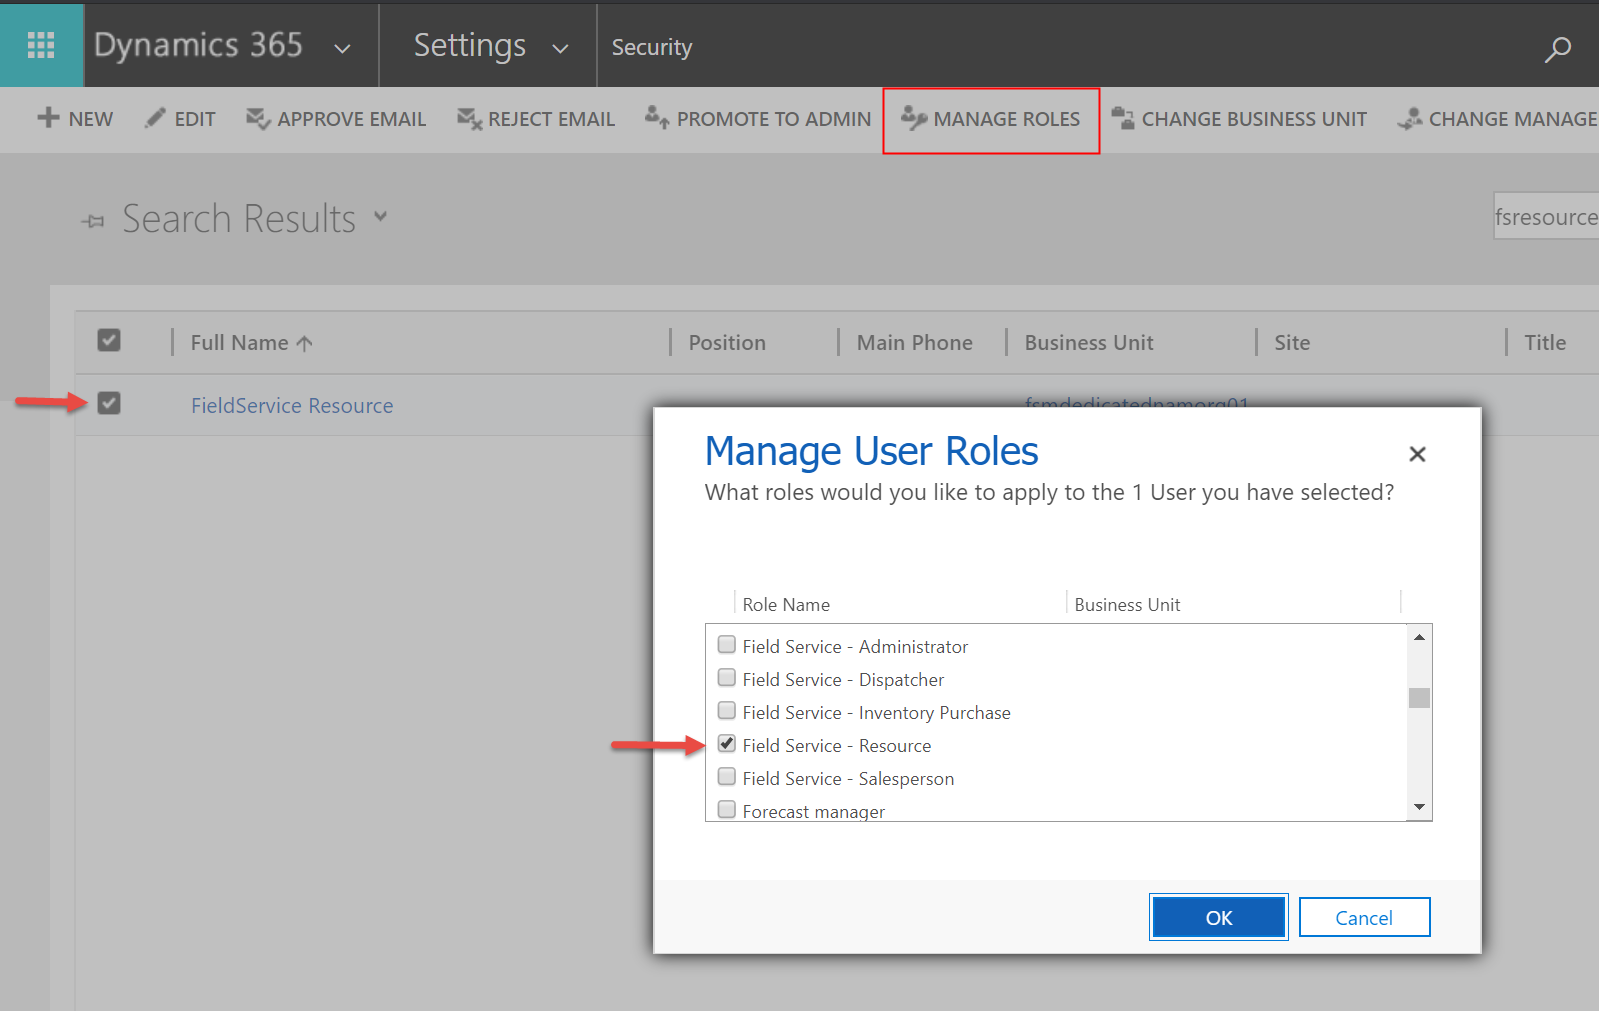 The Manage User Roles dialog in Dynamics 365.